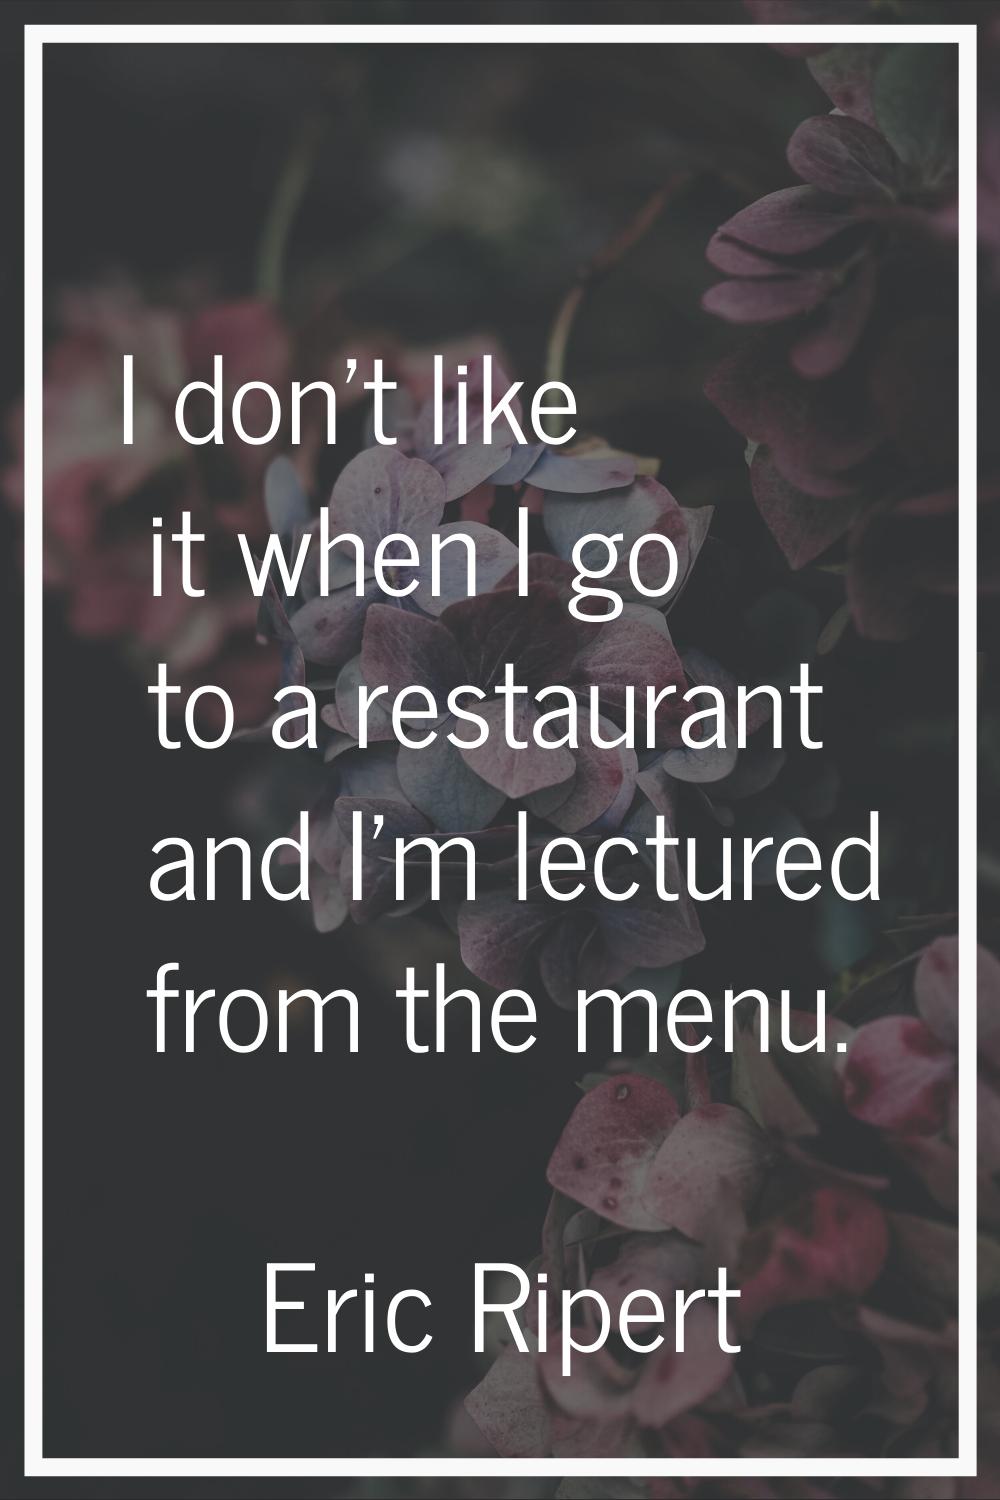 I don't like it when I go to a restaurant and I'm lectured from the menu.